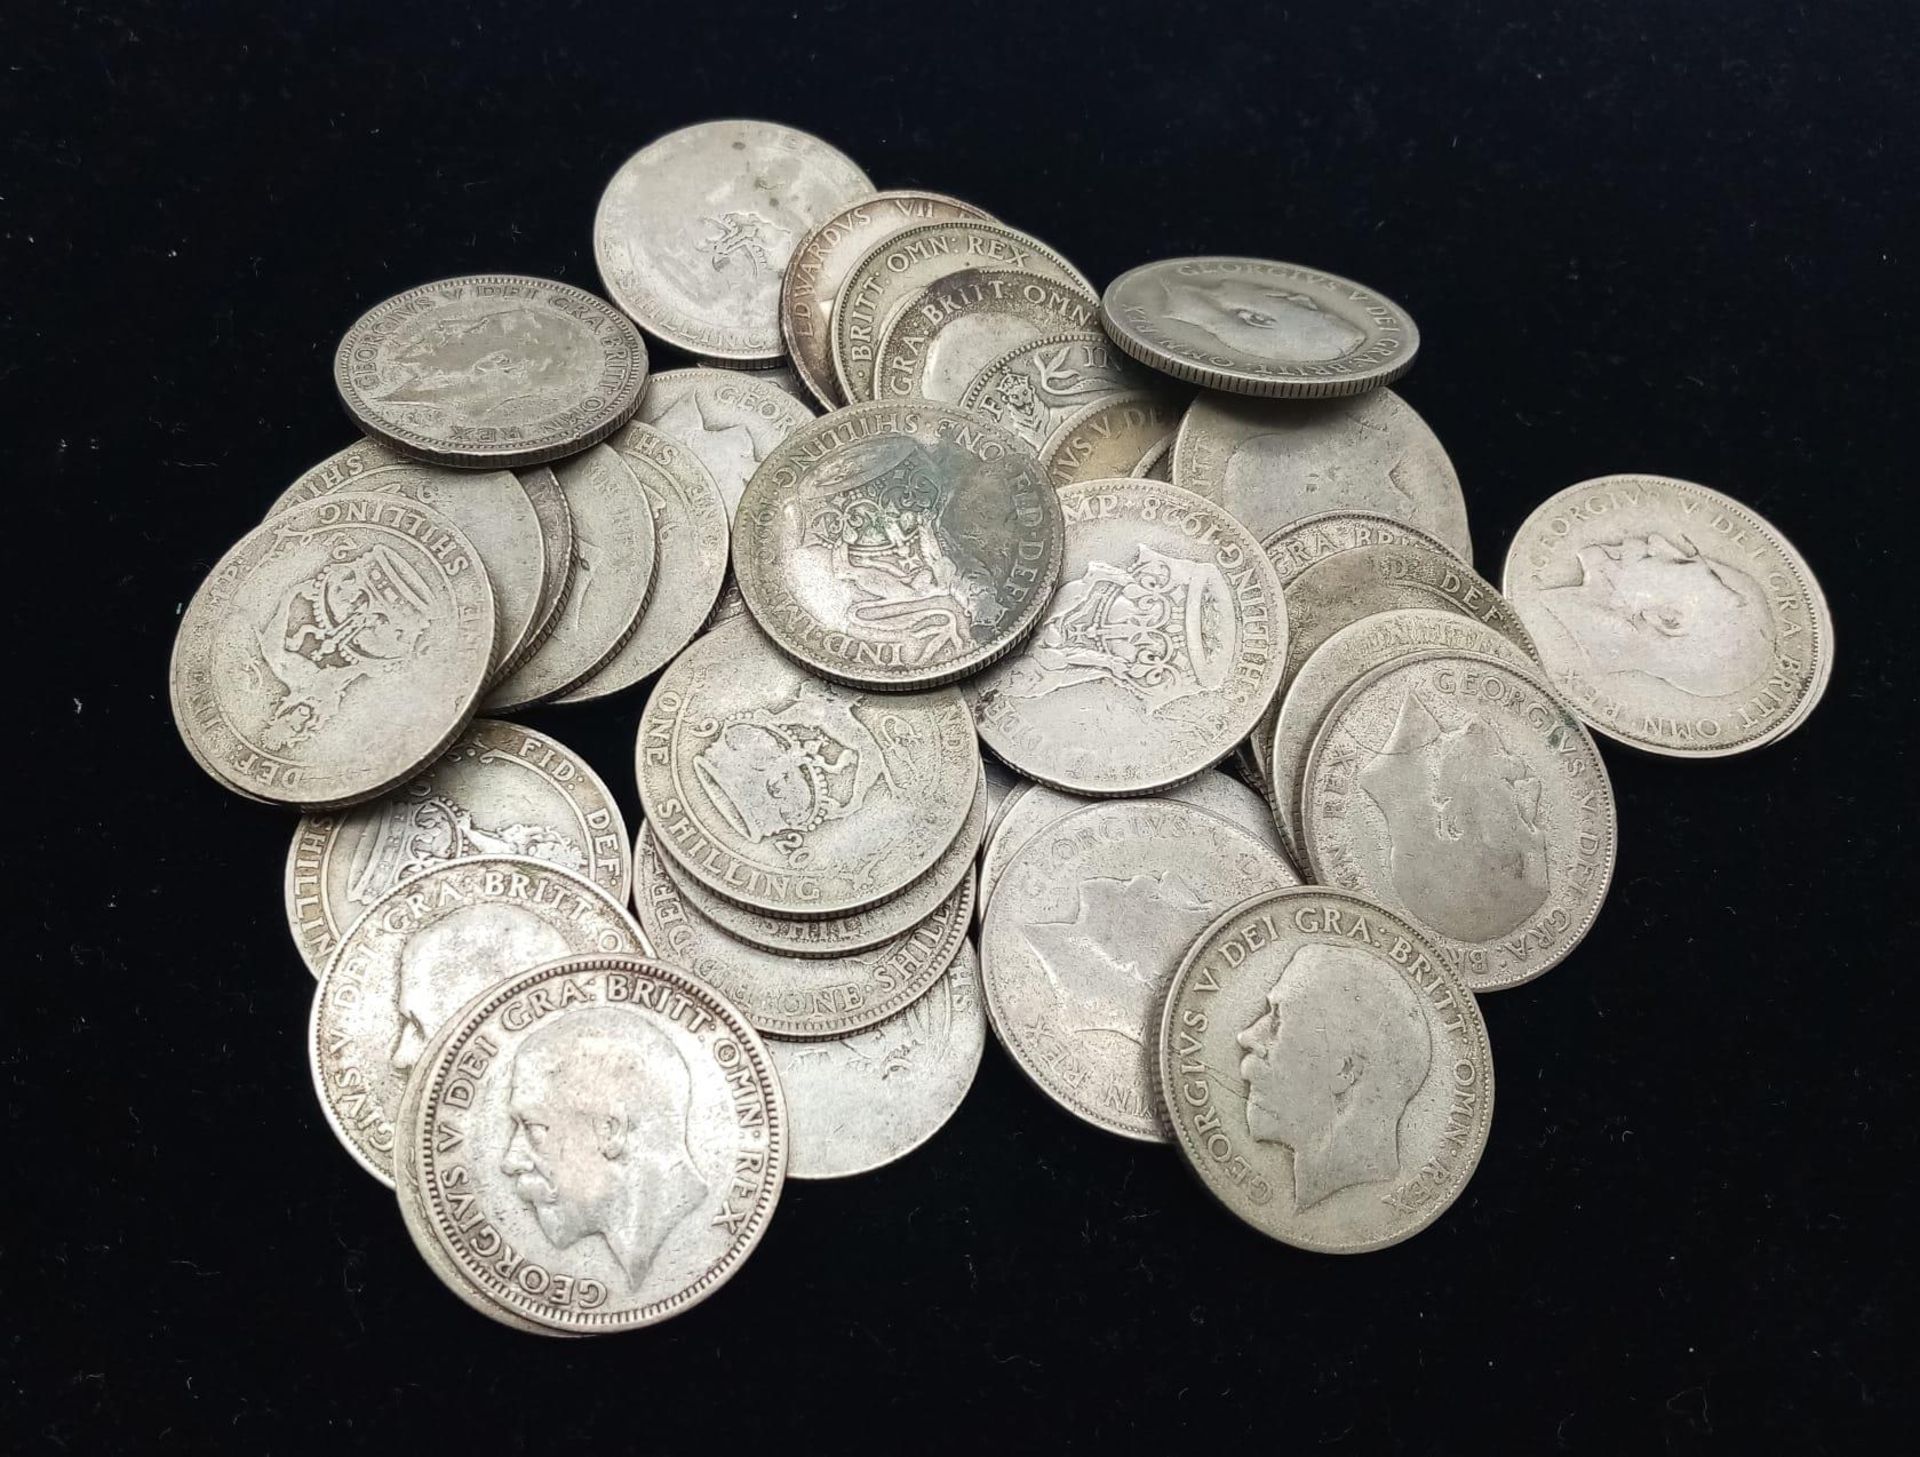 41 Pre 1947 British Silver Shilling Coins. 222g total weight. Please see photos for finer details.